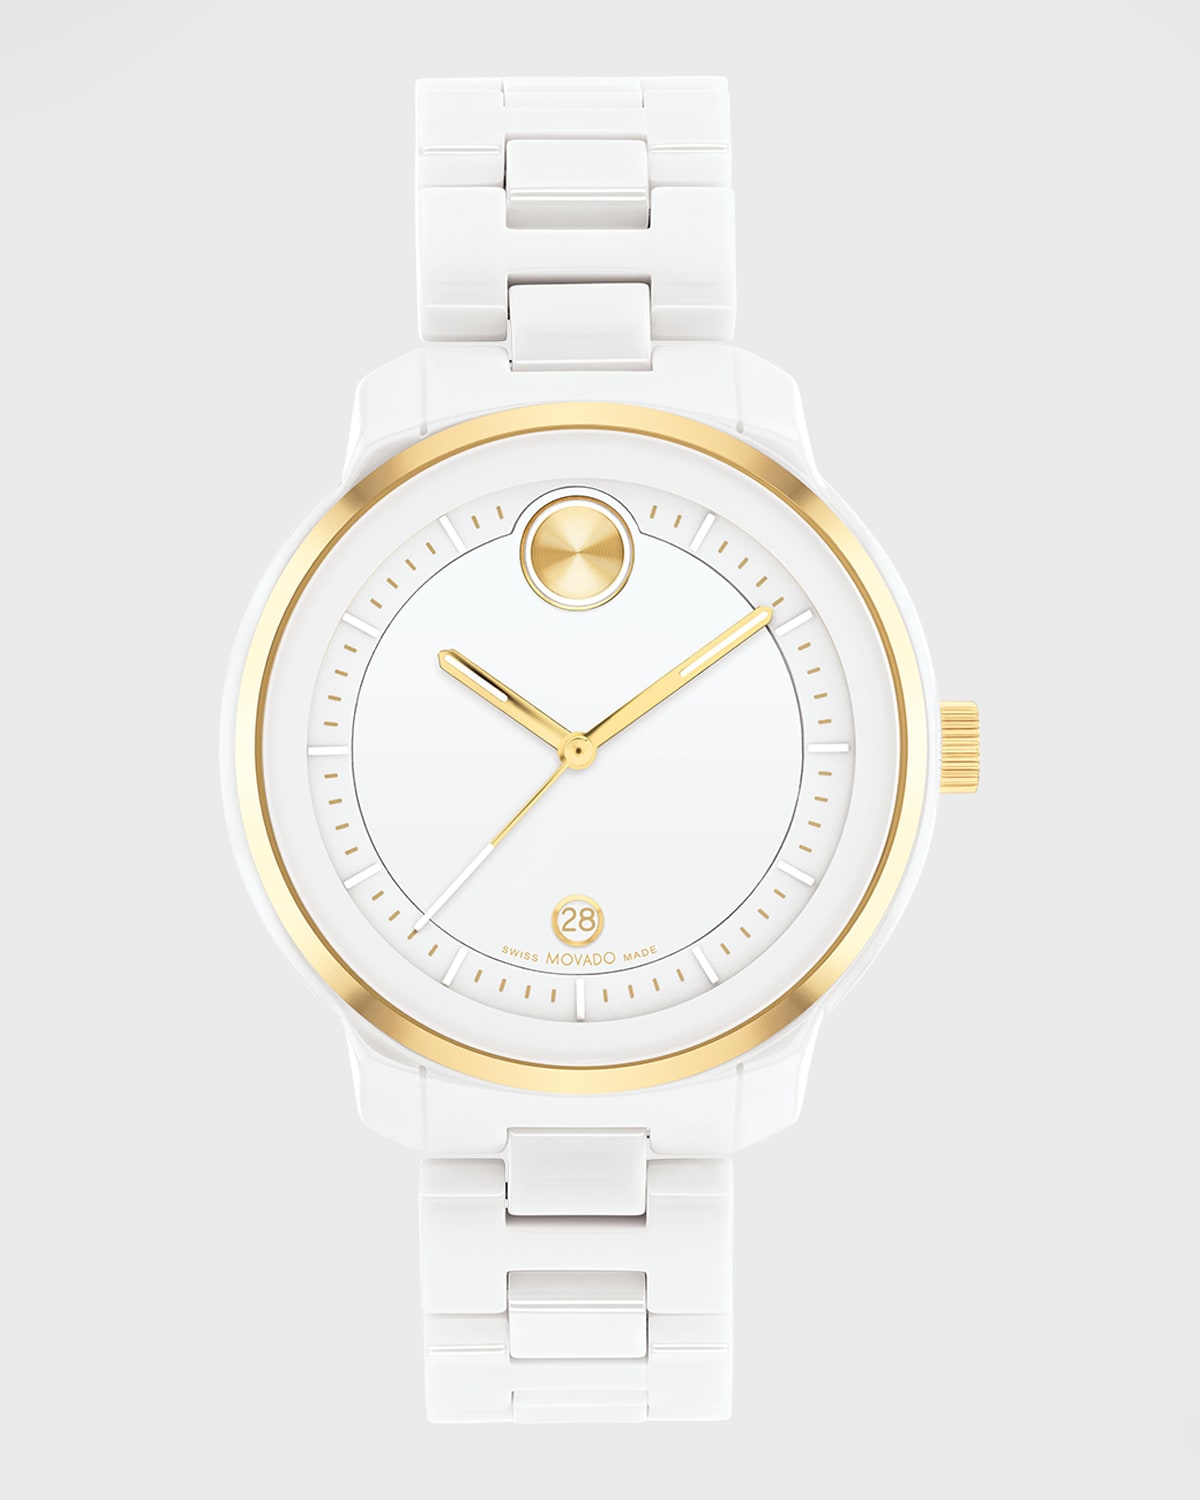 Verso Bracelet Watch with Date Window, White/Gold